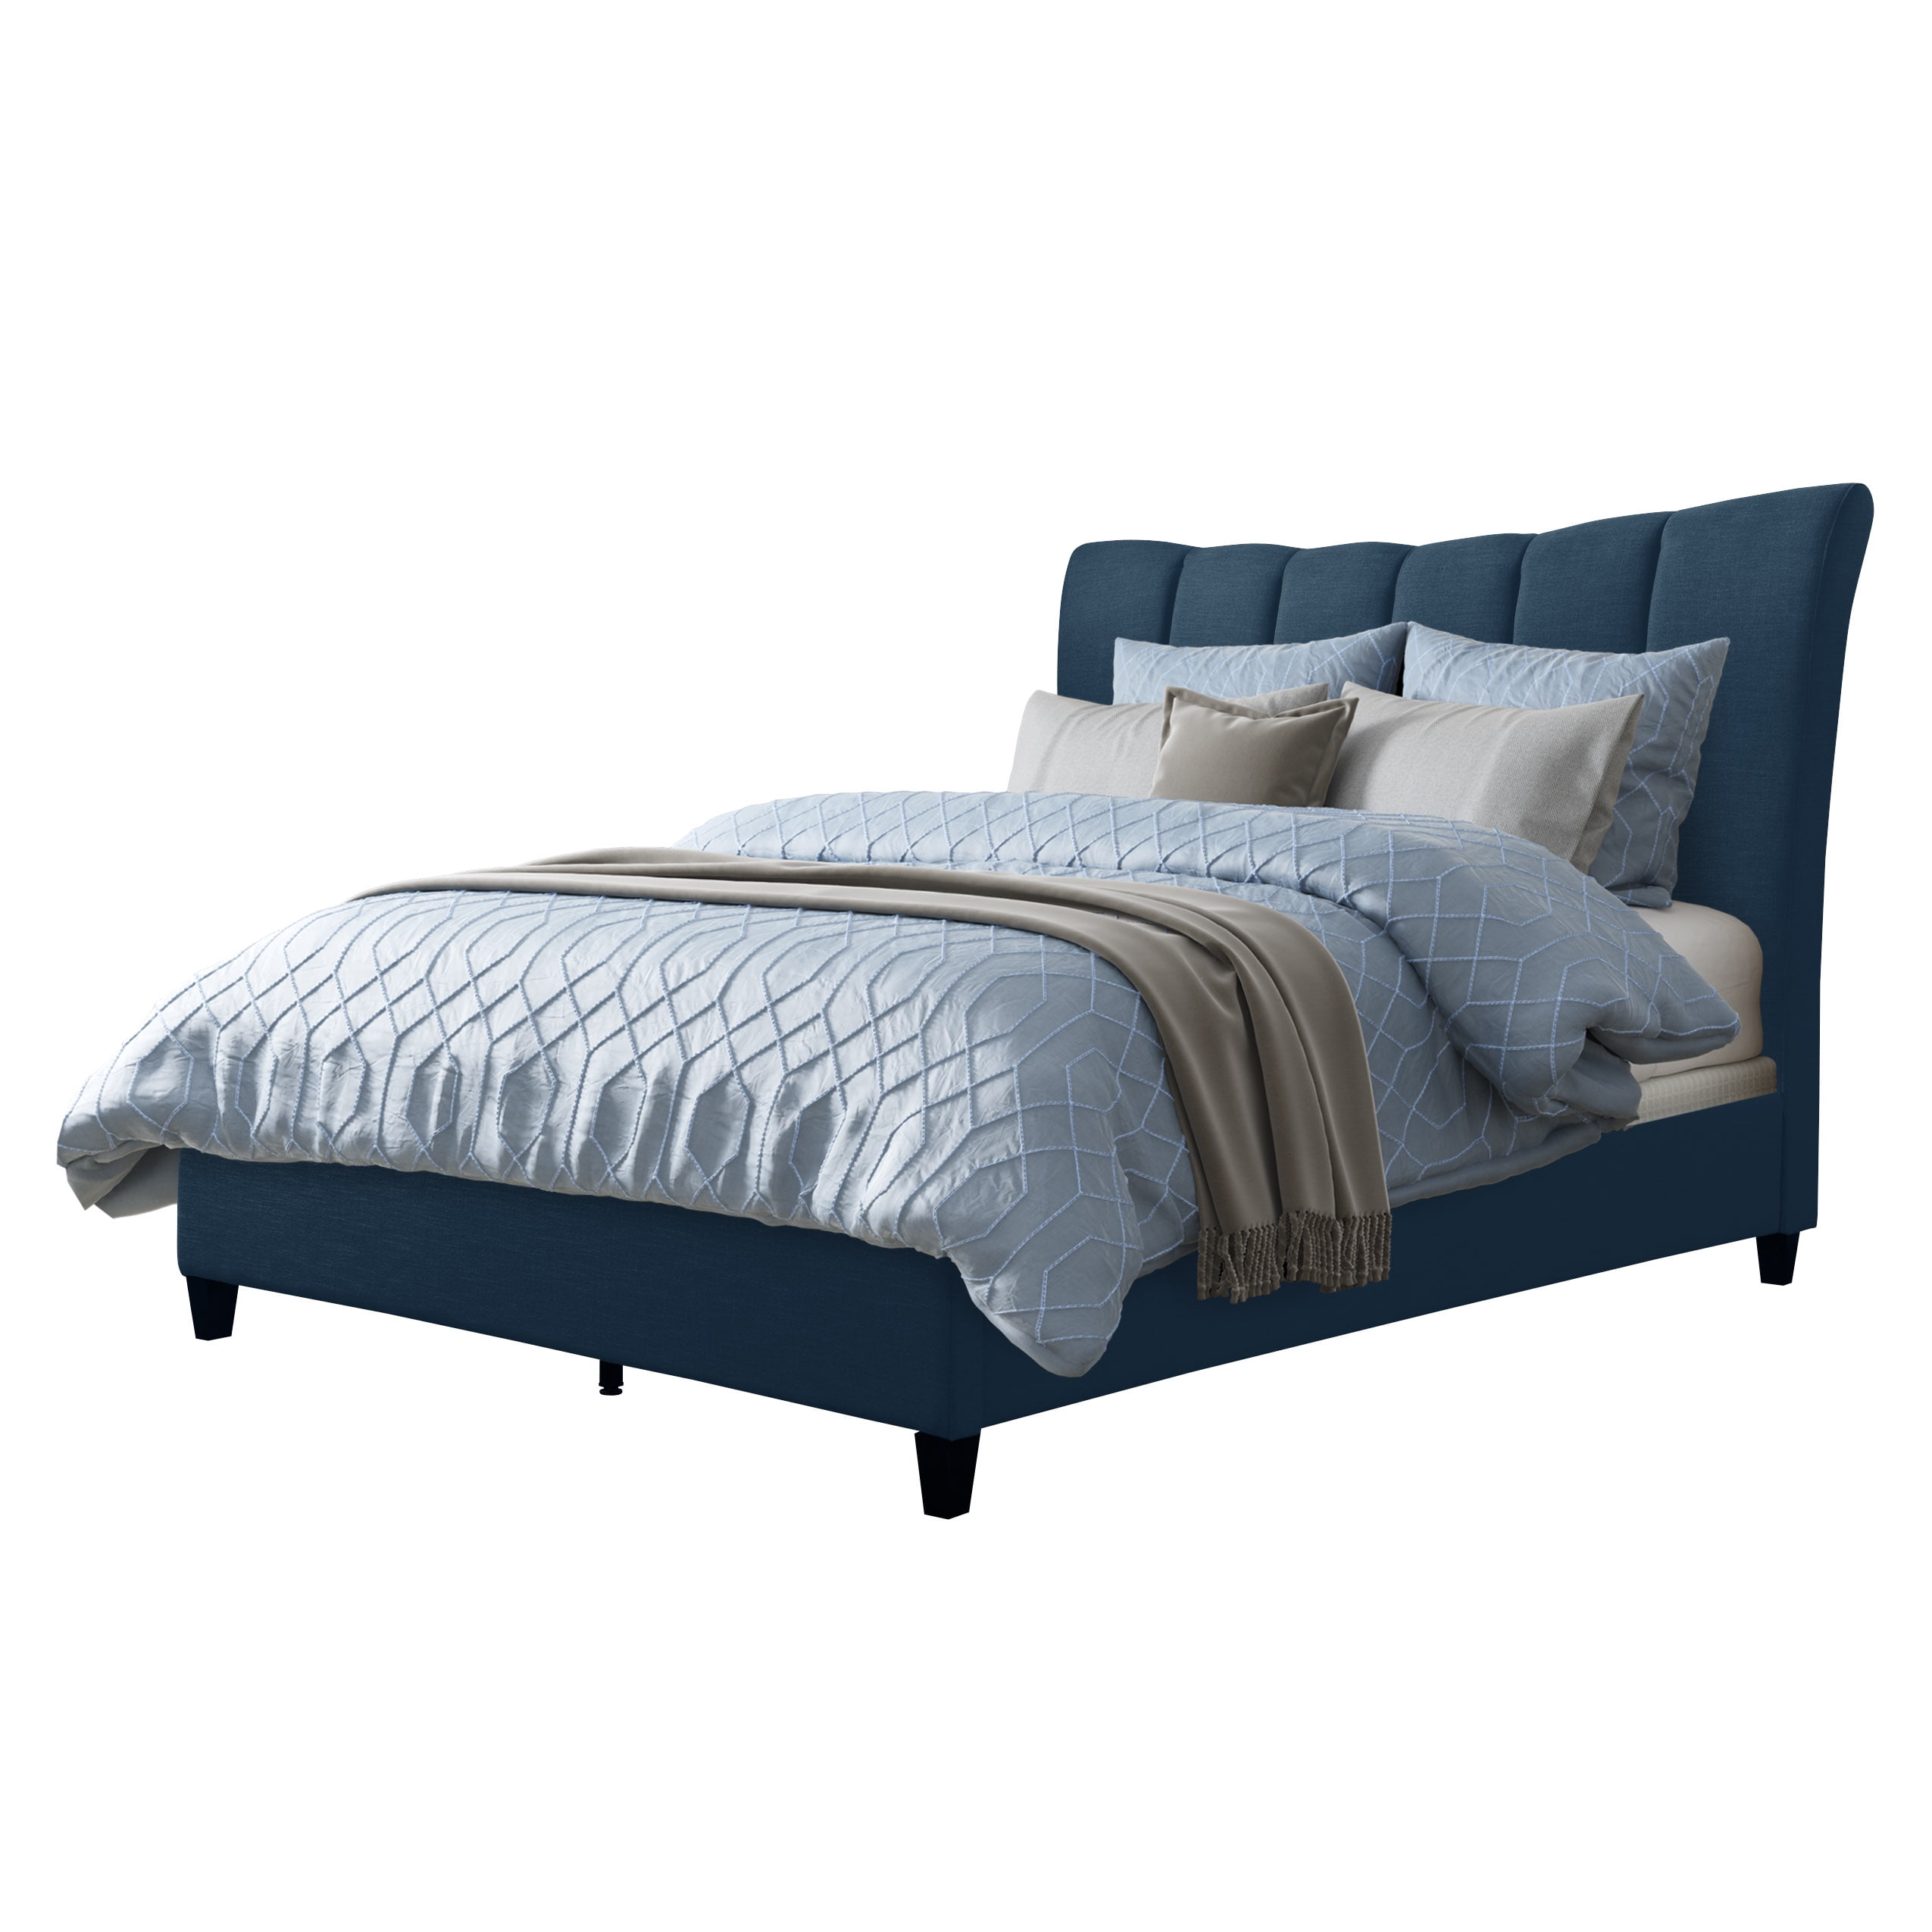 CorLiving Fabric Vertical Channel-Tufted Queen Bed Frame - Walmart.com